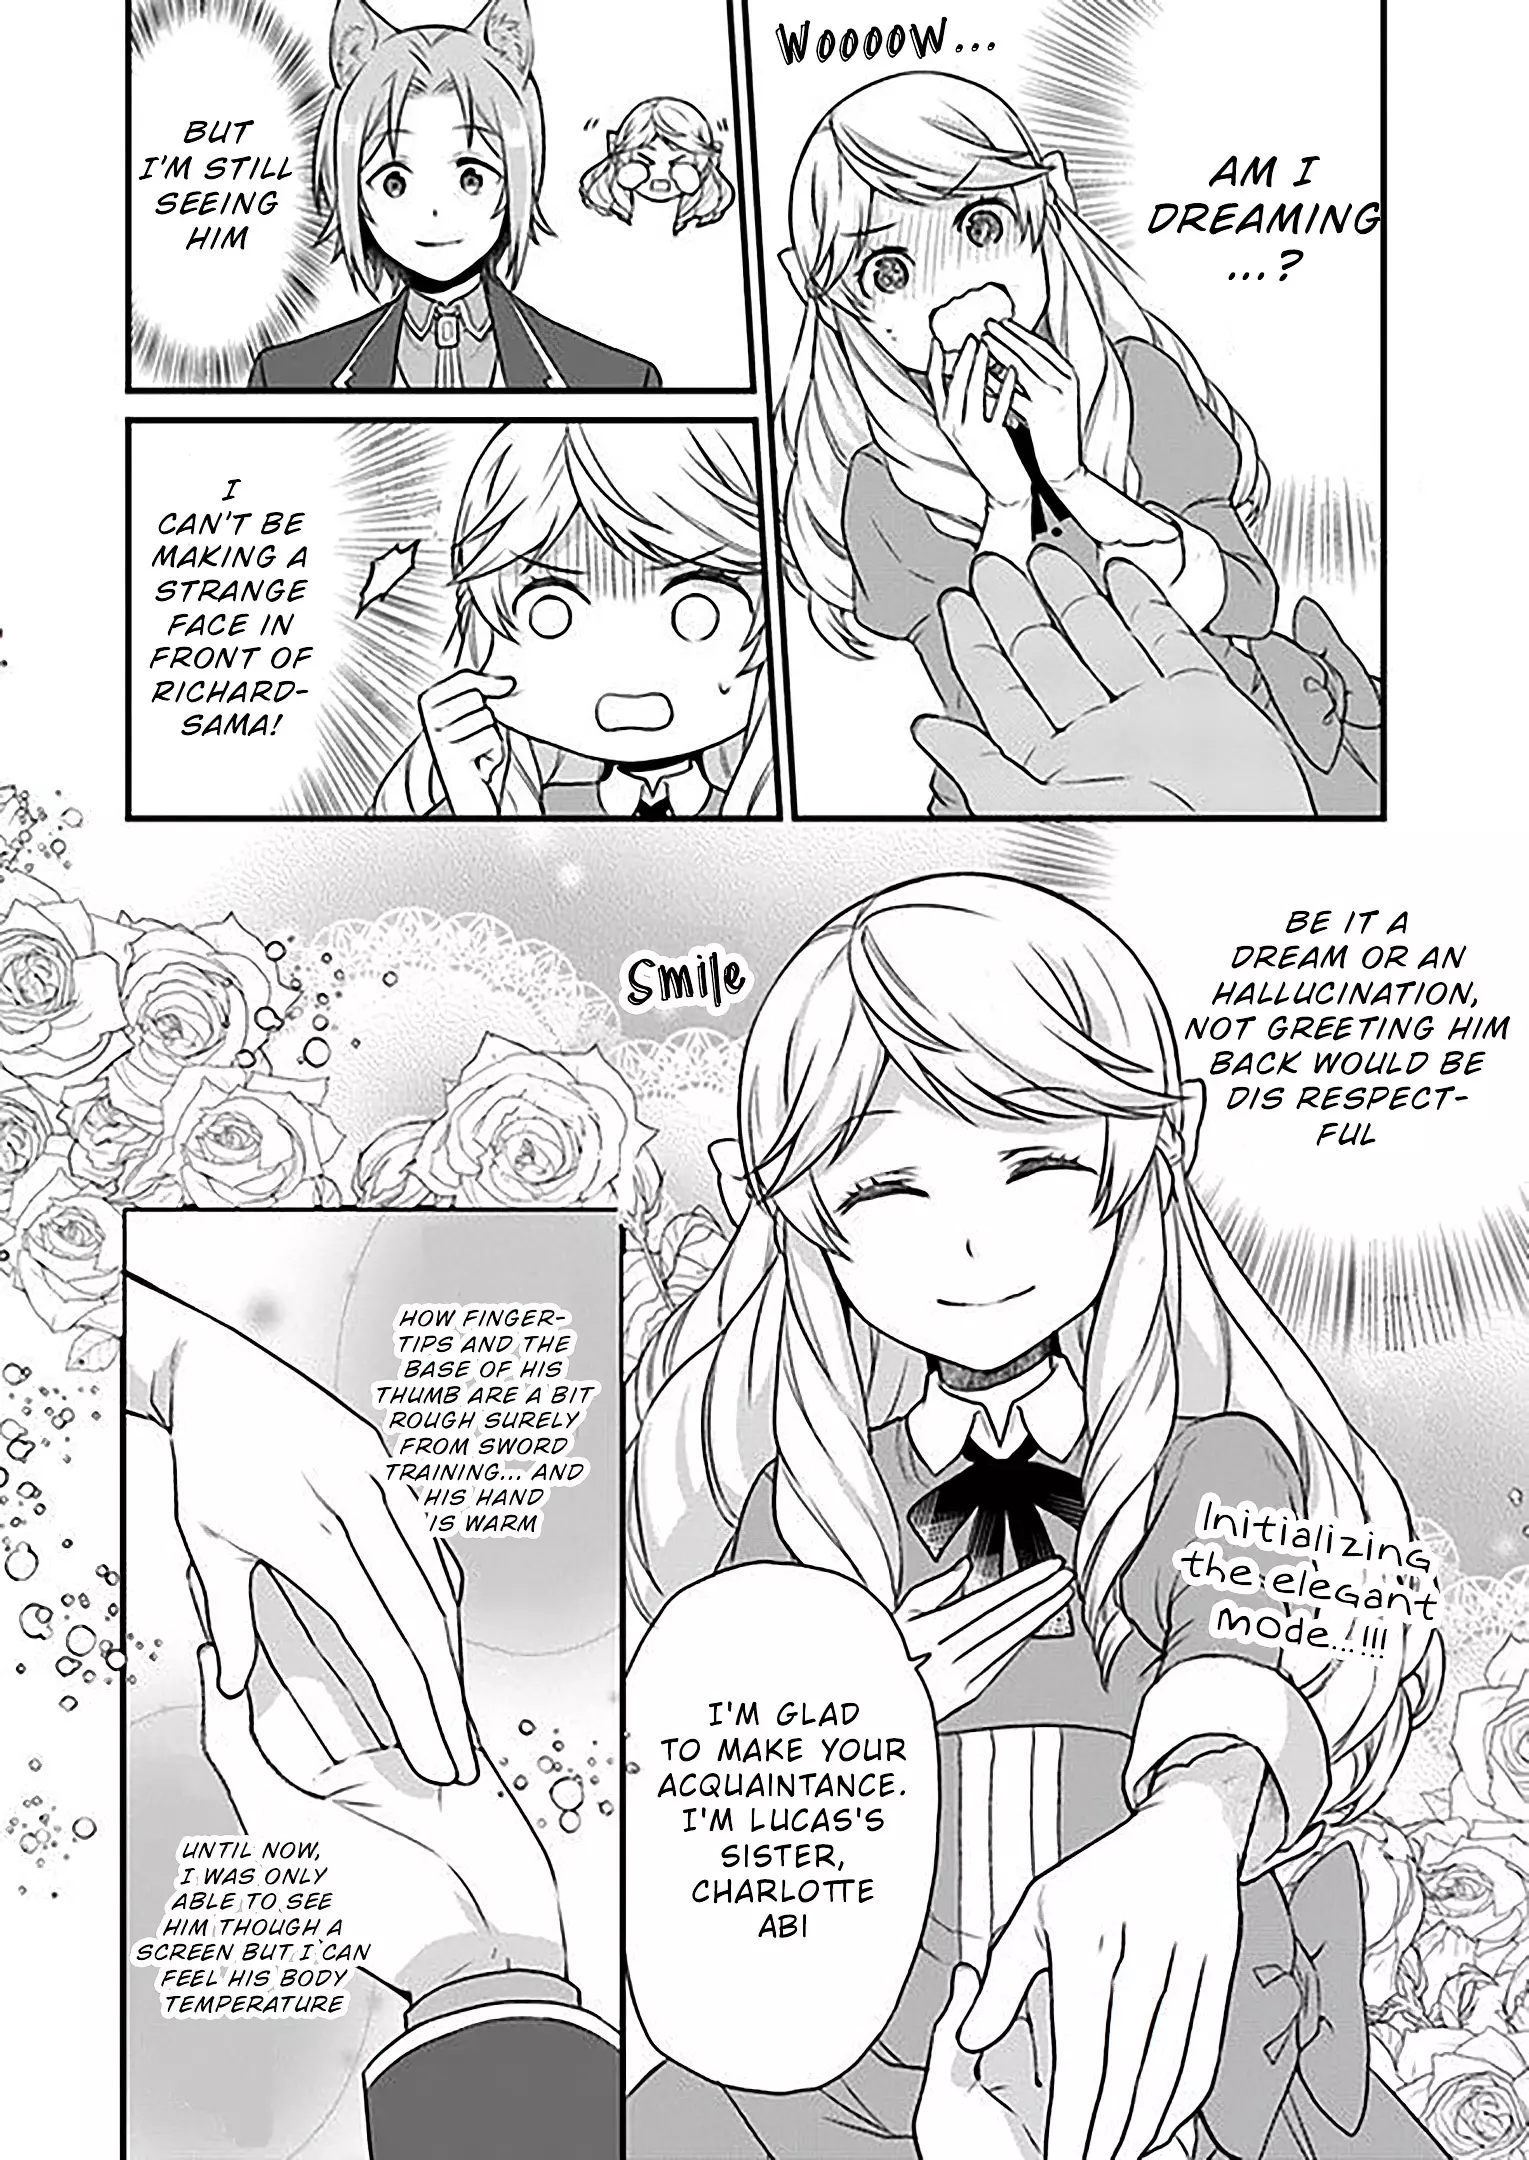 Because Of Her Love For Sake, The Otome Game Setting Was Broken And The Villainous Noblewoman Became The Noblewoman With Cheats - 6 page 4-81445032